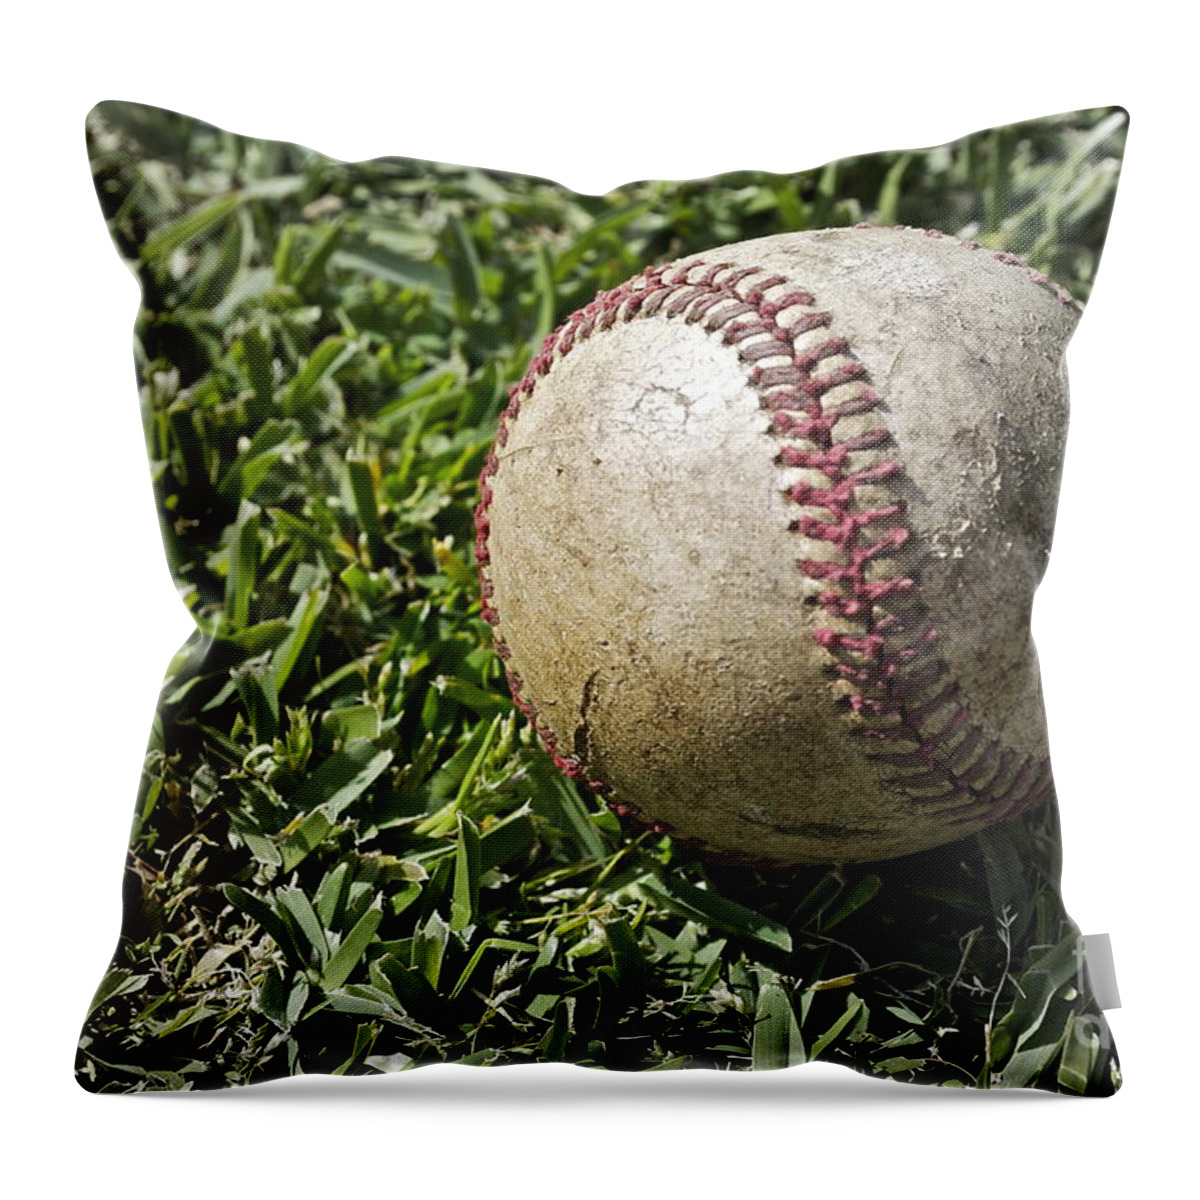 Baseball Throw Pillow featuring the photograph Cure For Spring Fever by Gwyn Newcombe